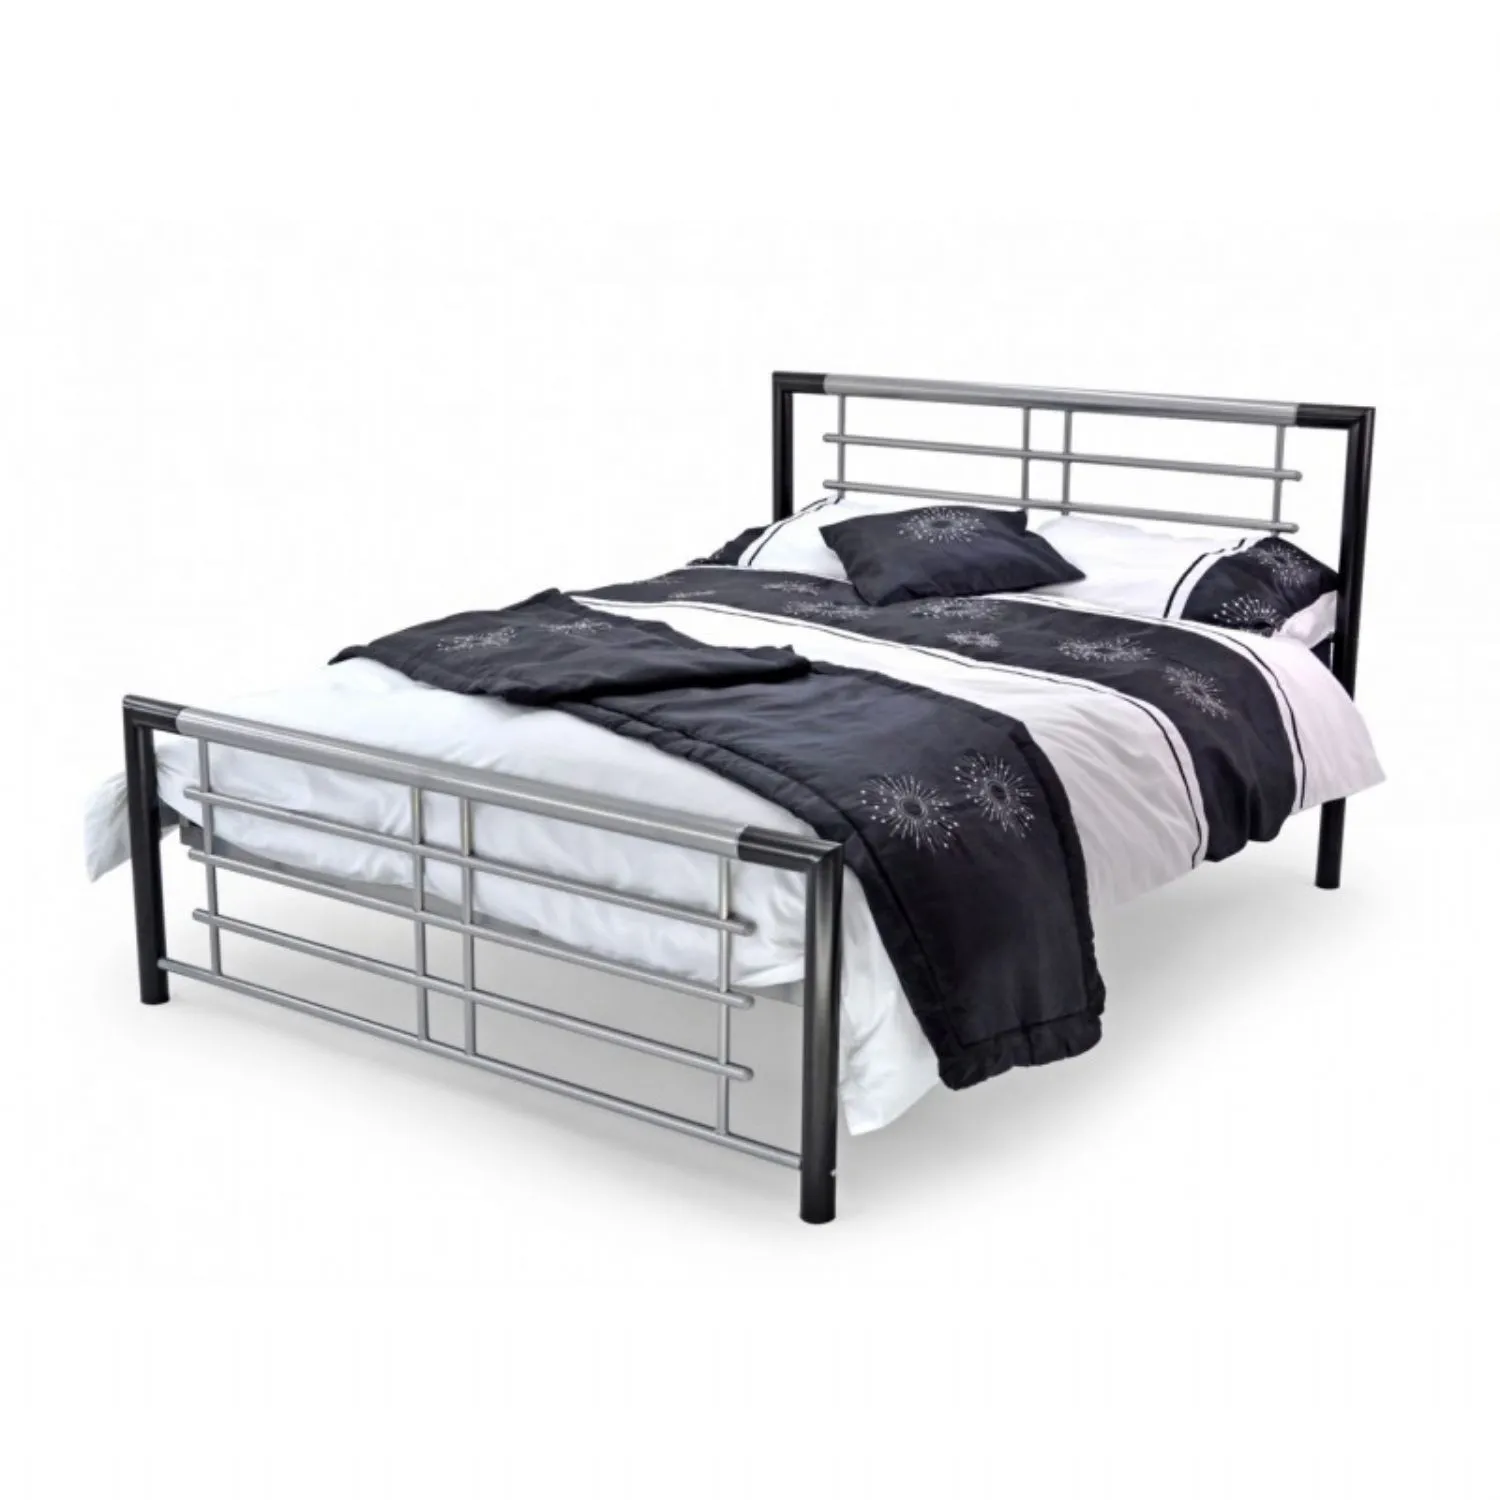 Black and Silver Mesh Based Metal Bed 4ft Small Double